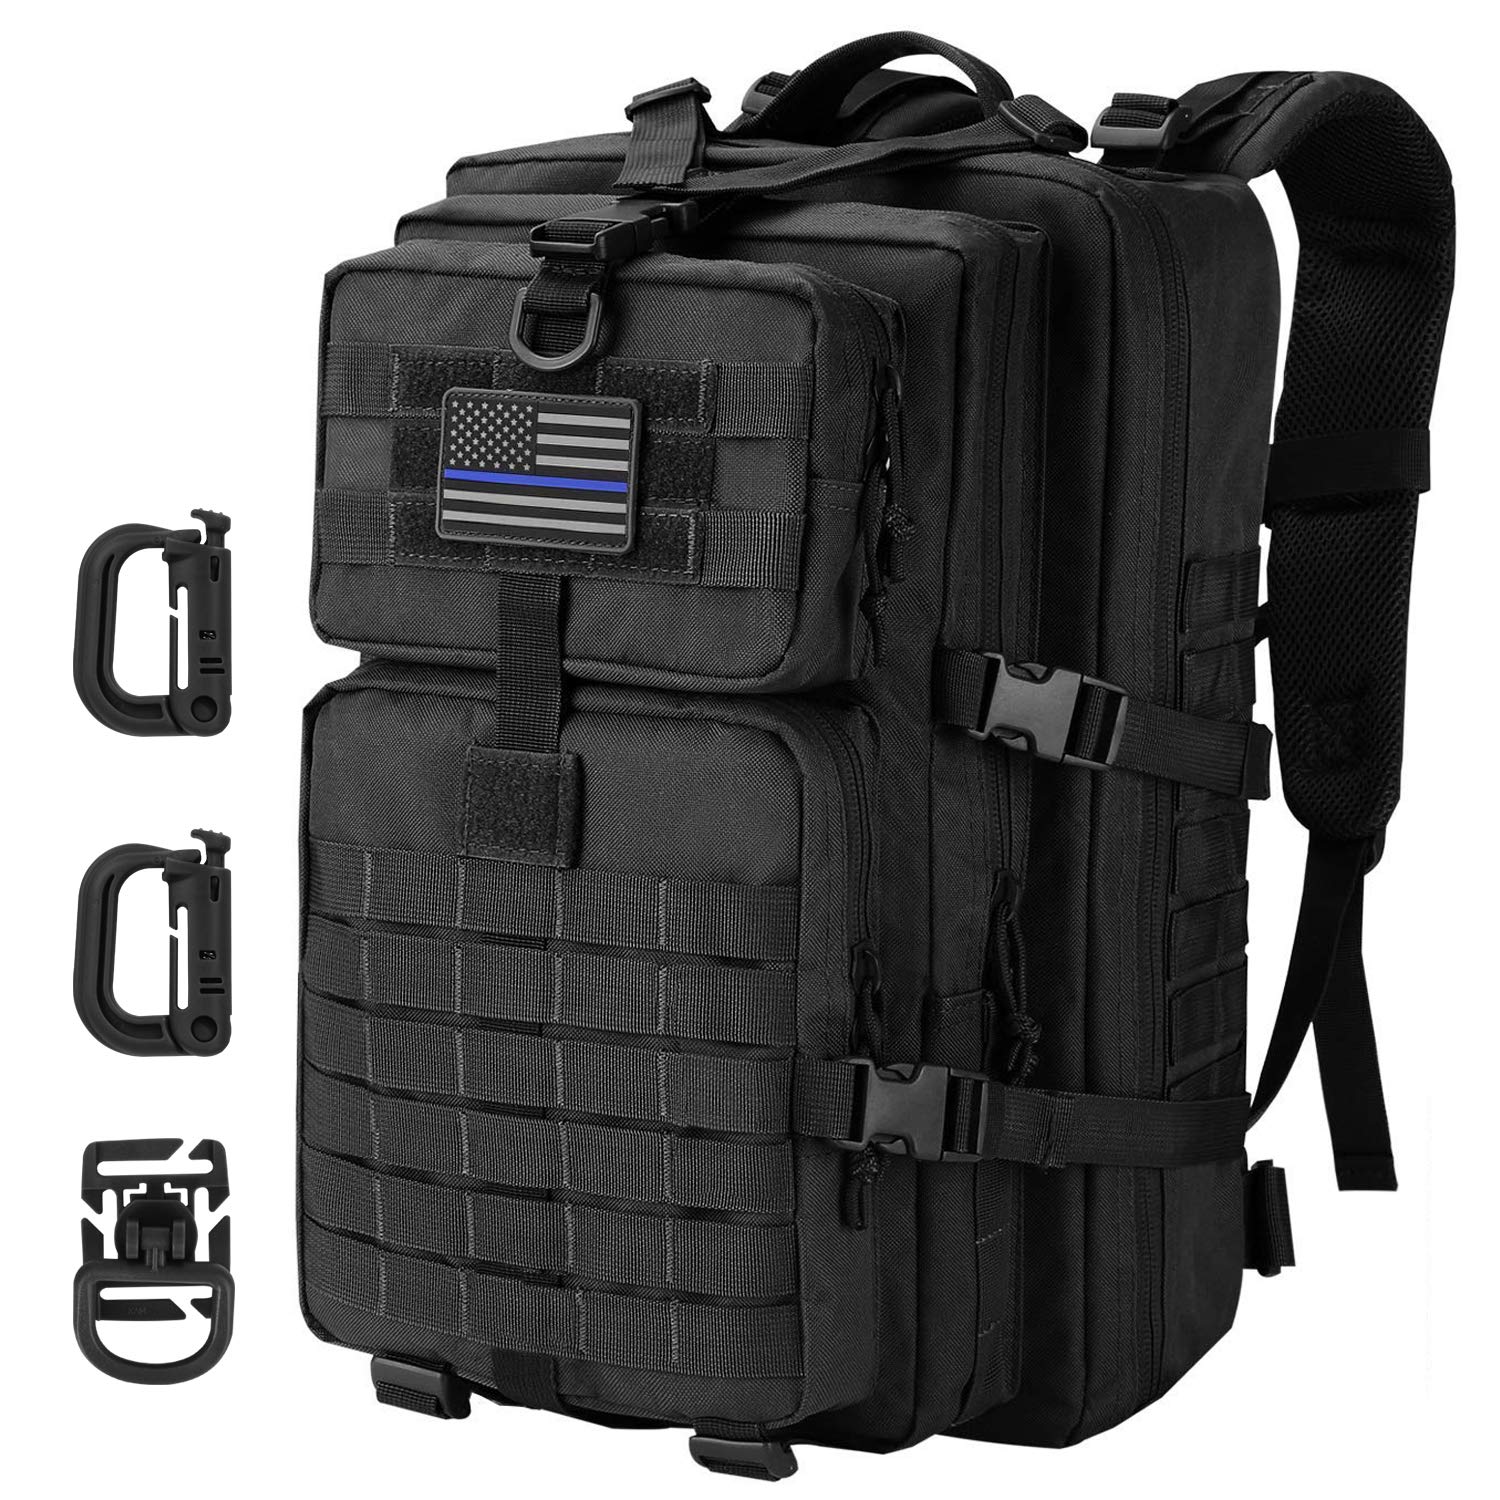 Exclusif Hannibal Tactical Sac à dos Style Tactique Mil